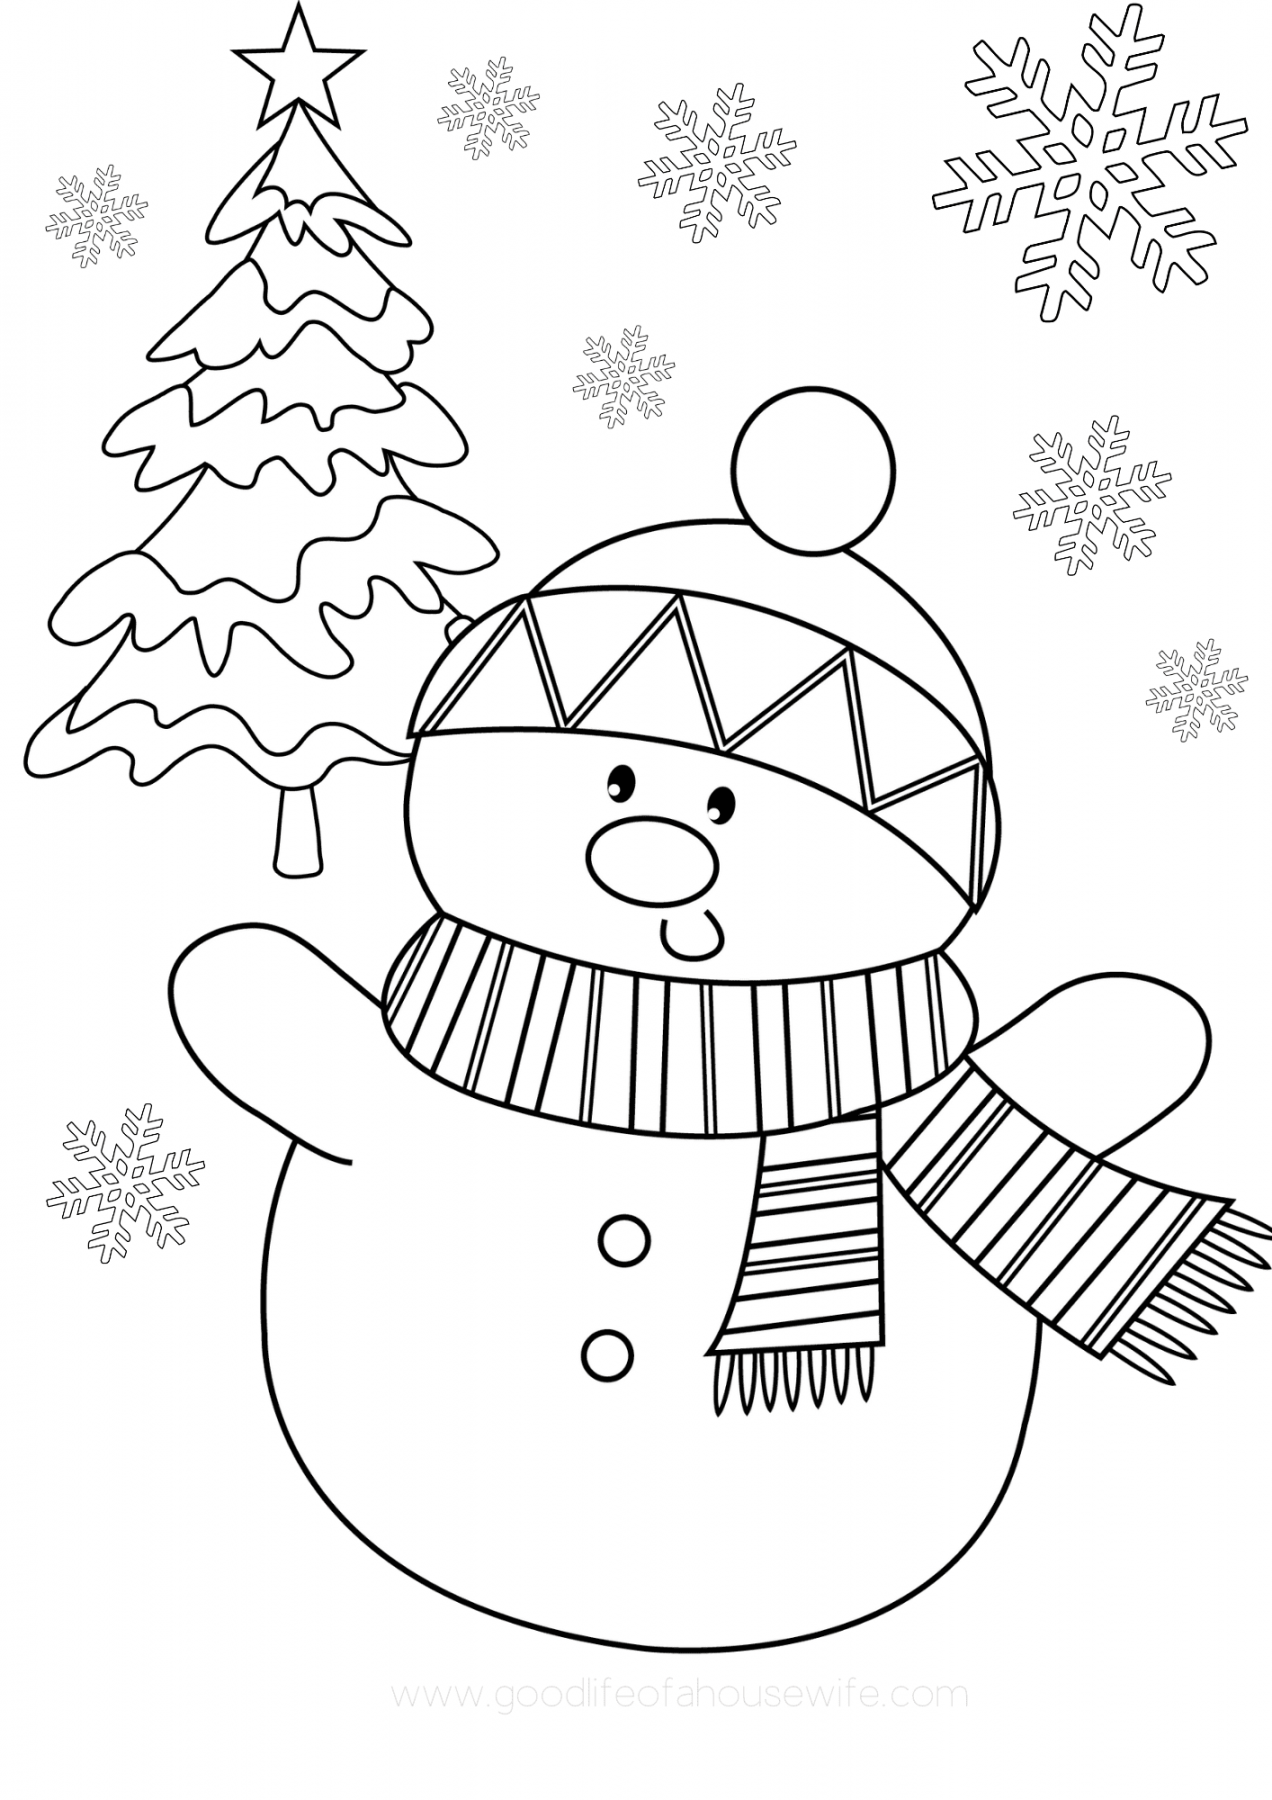 Free Christmas Coloring Pages Printable - Printable - Free Printable Christmas Coloring Pages - Good Life of a Housewife